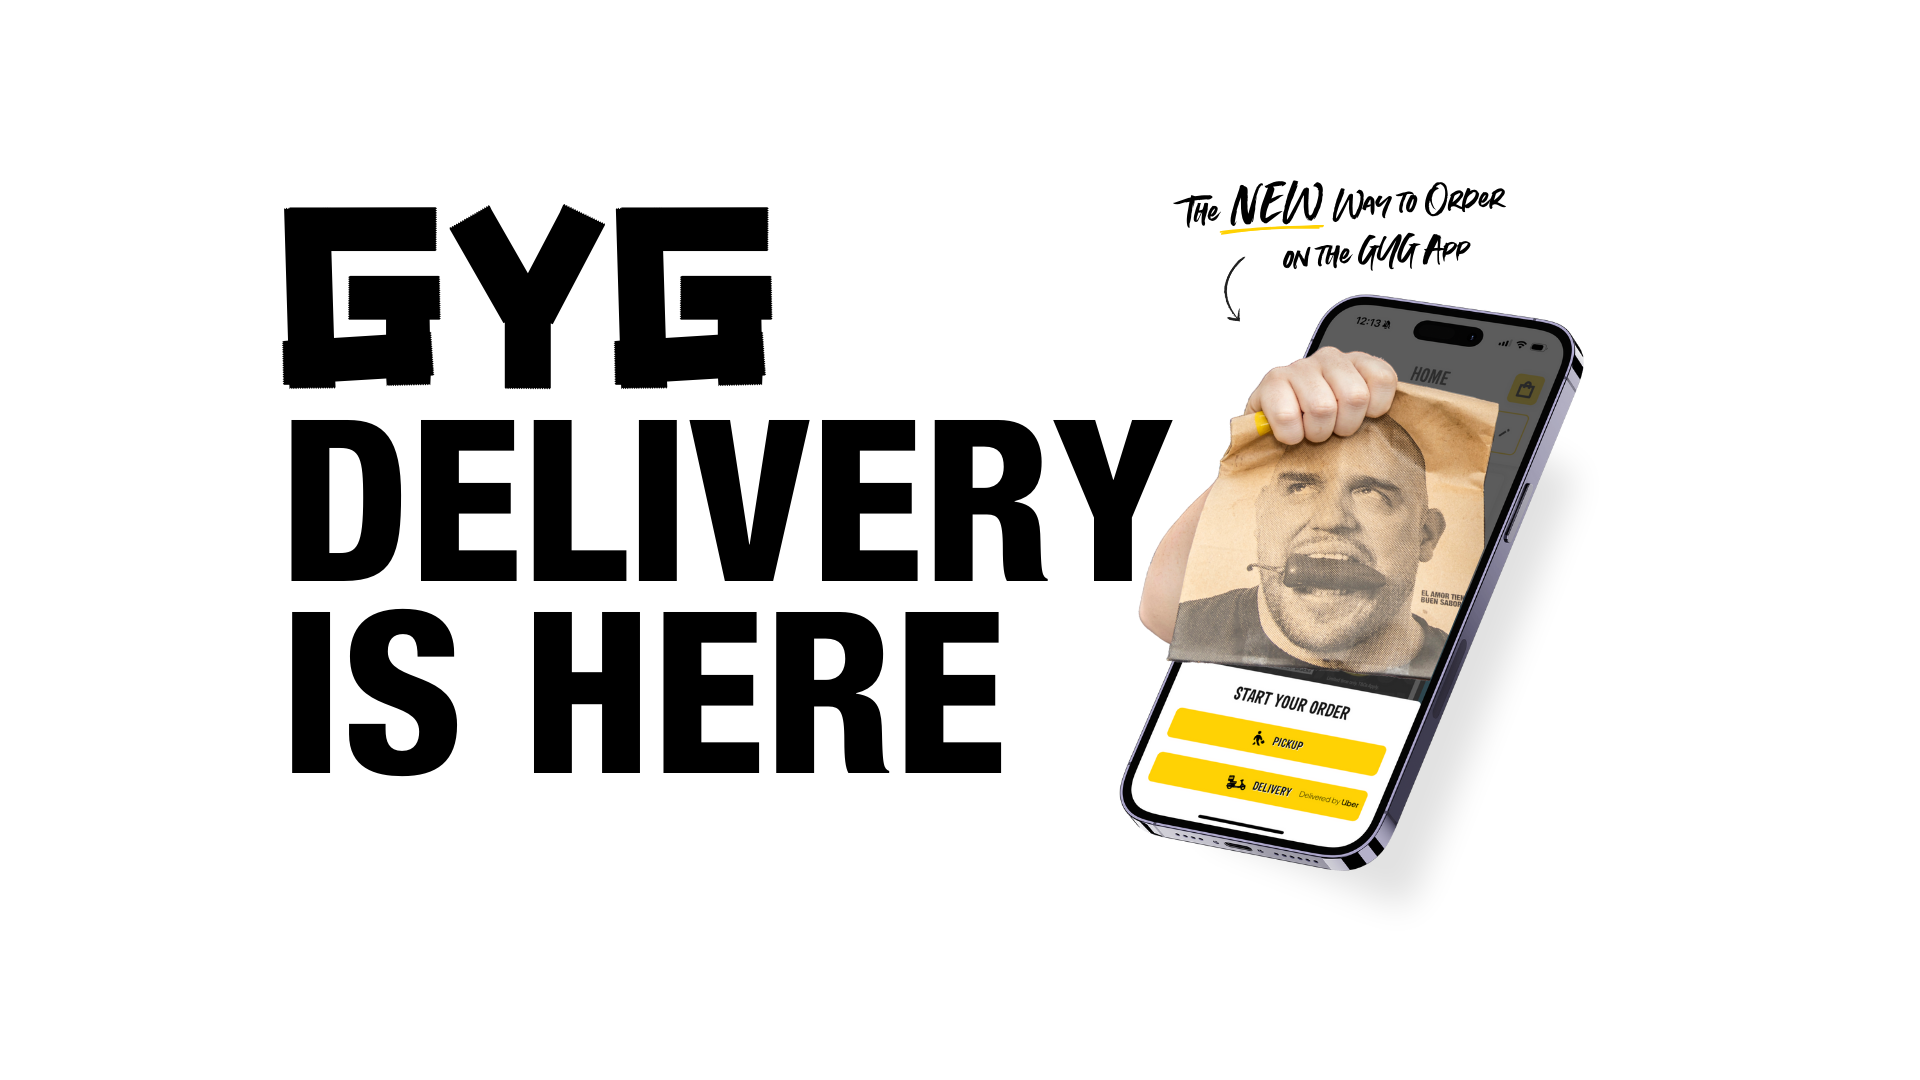 GYG Deliver is here -mobile